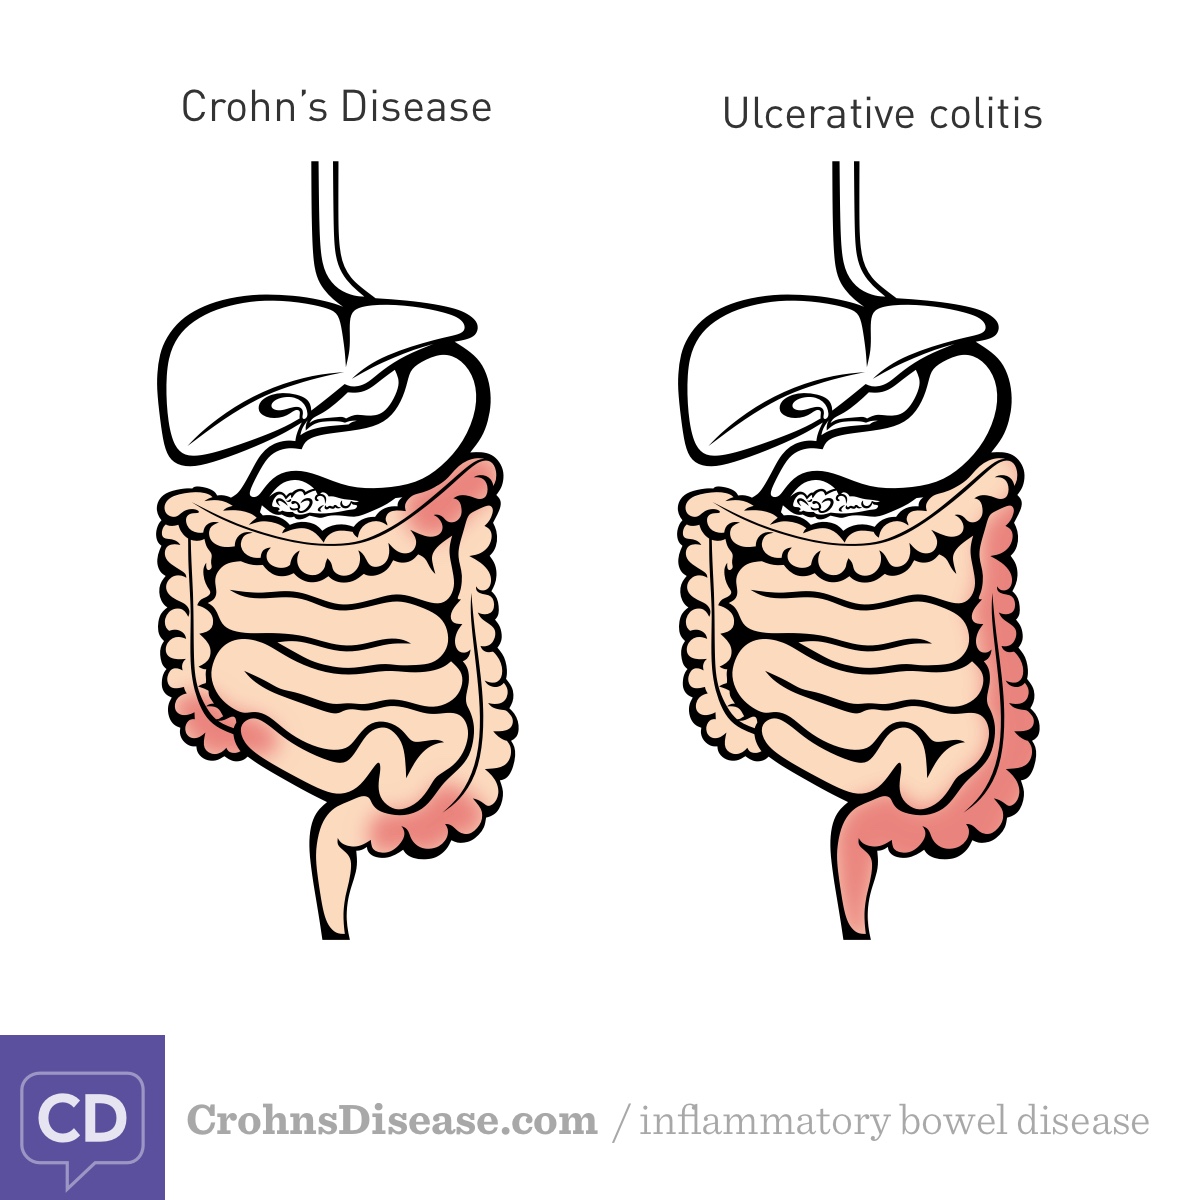 Side by side digestive tracts showing the location of inflammation in Crohn’s disease versus ulcerative colitis.